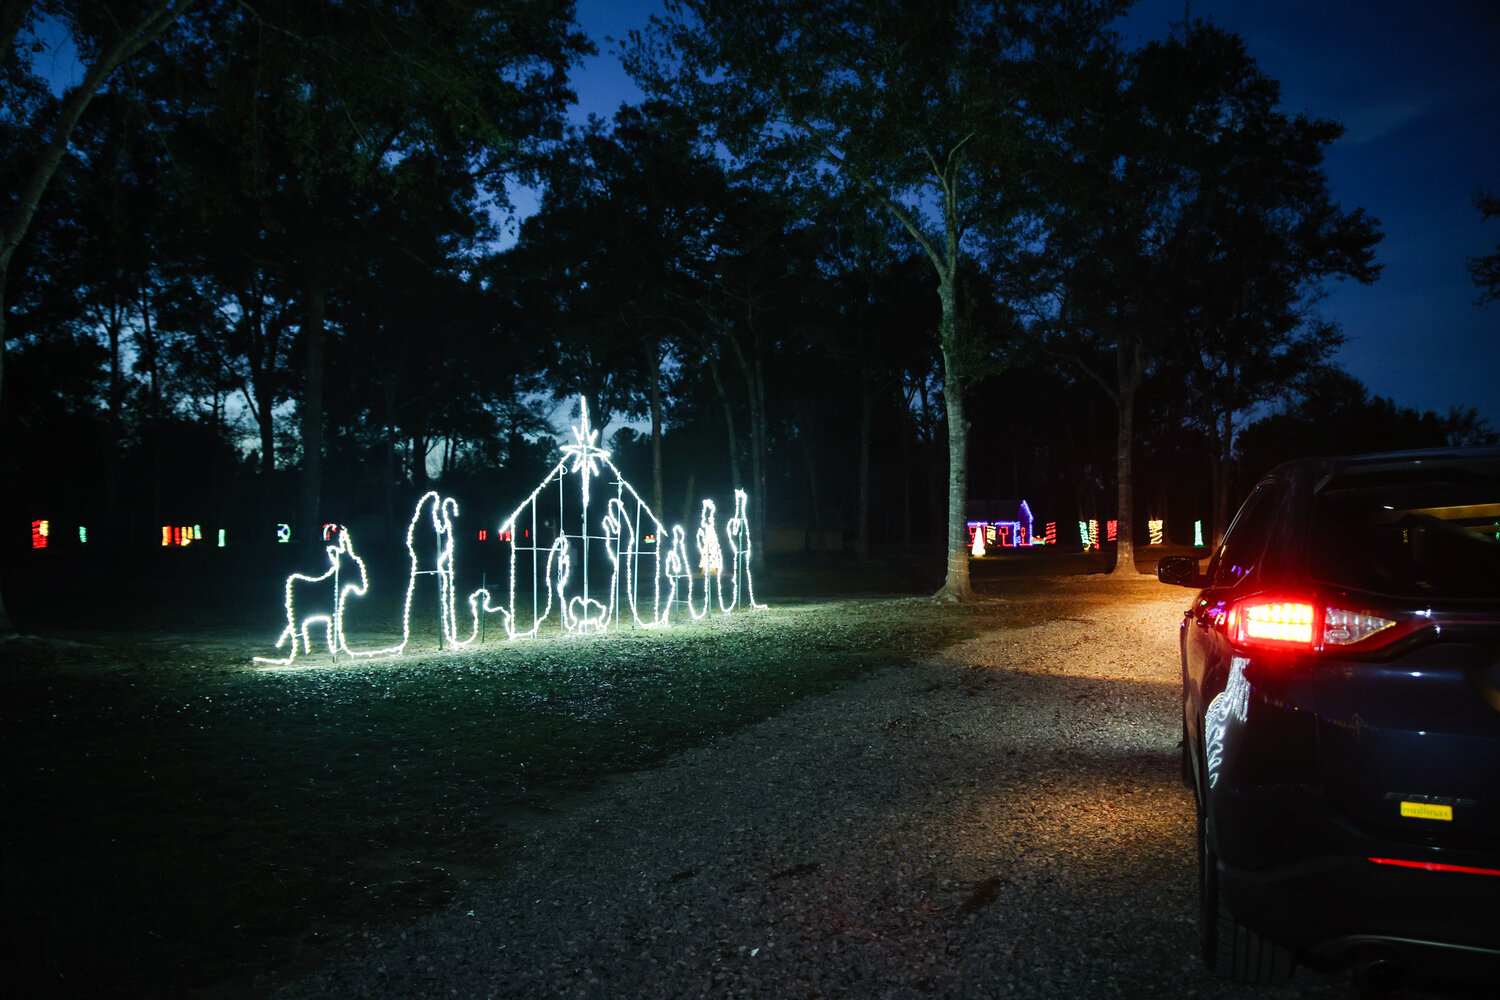 Scenes such as the Nativity scene, Christmas trees, reindeer and more can be spotted at the Light-Drive-Through.